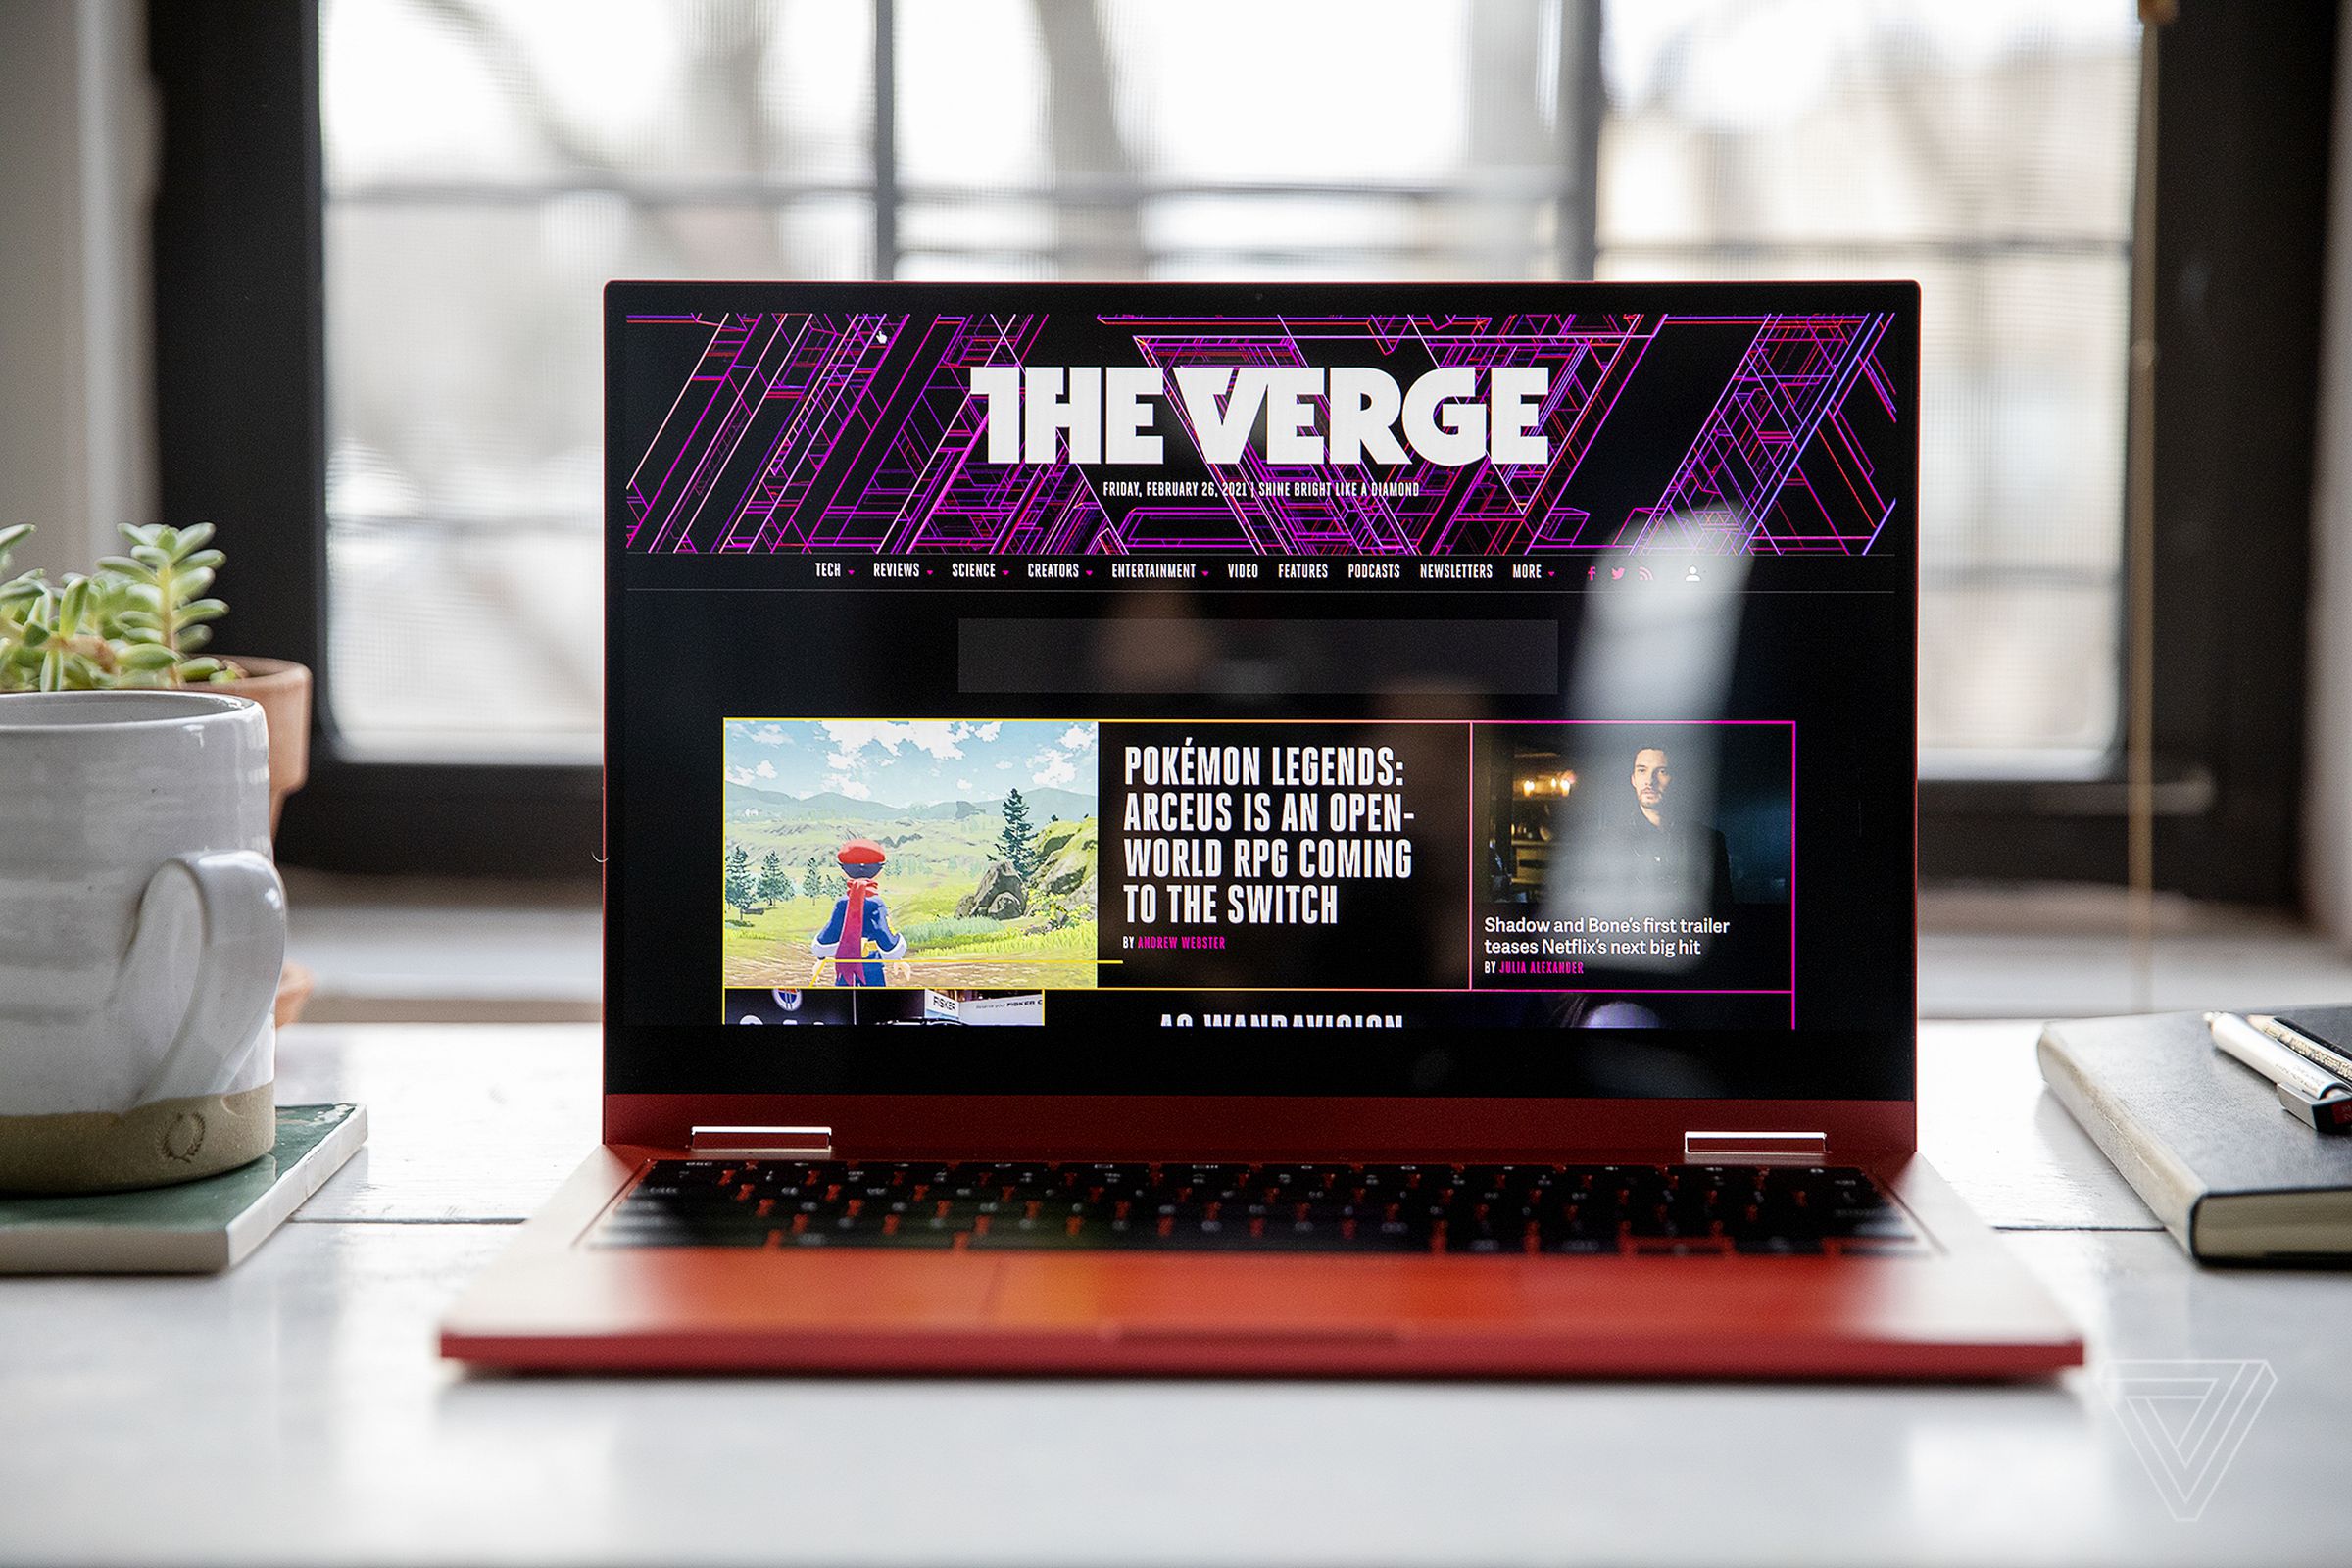 The Samsung Galaxy Chromebook 2 on a desk in front of a window, open with a mug and small plant on its left and some books on its right. The screen displays The Verge homepage.